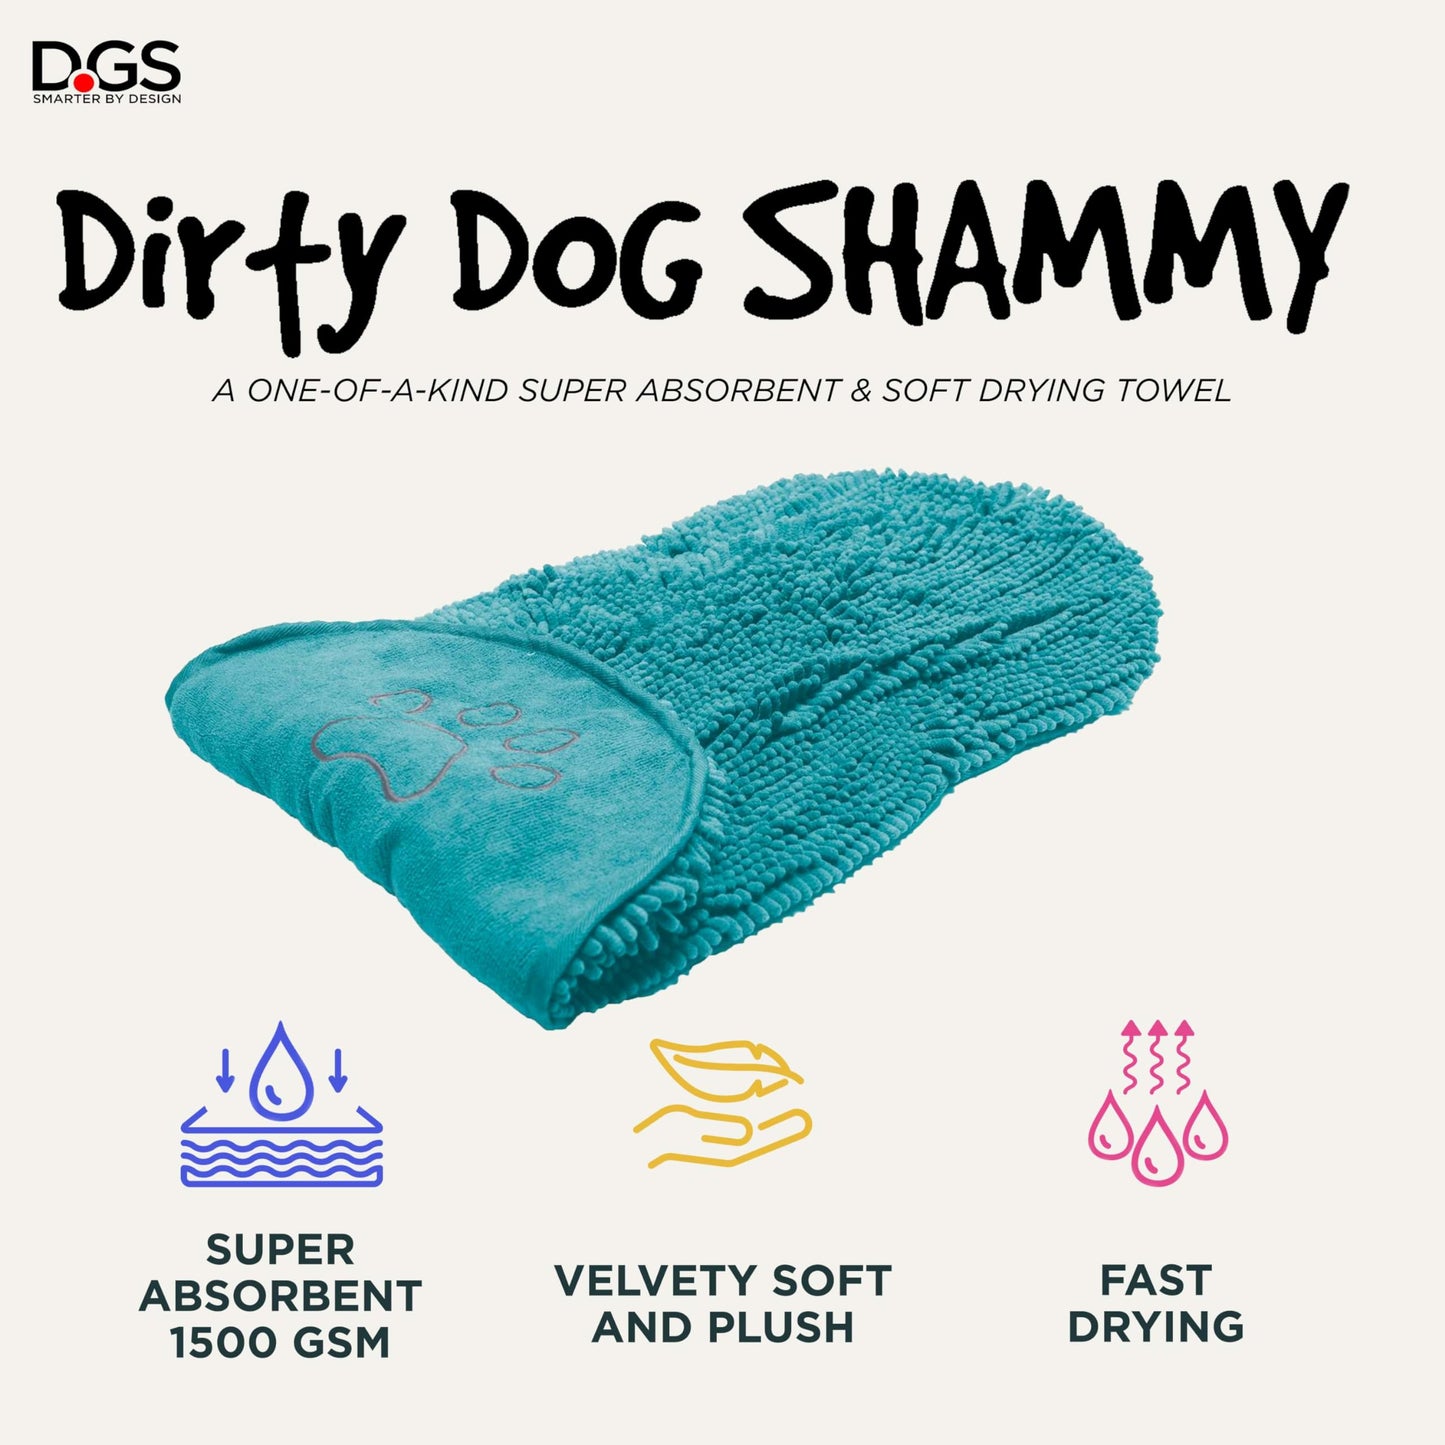 Dog Gone Smart Shammy Dog Towels For Drying Dogs - Heavy Duty Soft Microfiber Bath Towel - Super Absorbent, Quick Drying, & Machine Washable - Must Have Dog & Cat Bathing Supplies | Blue 13x31"